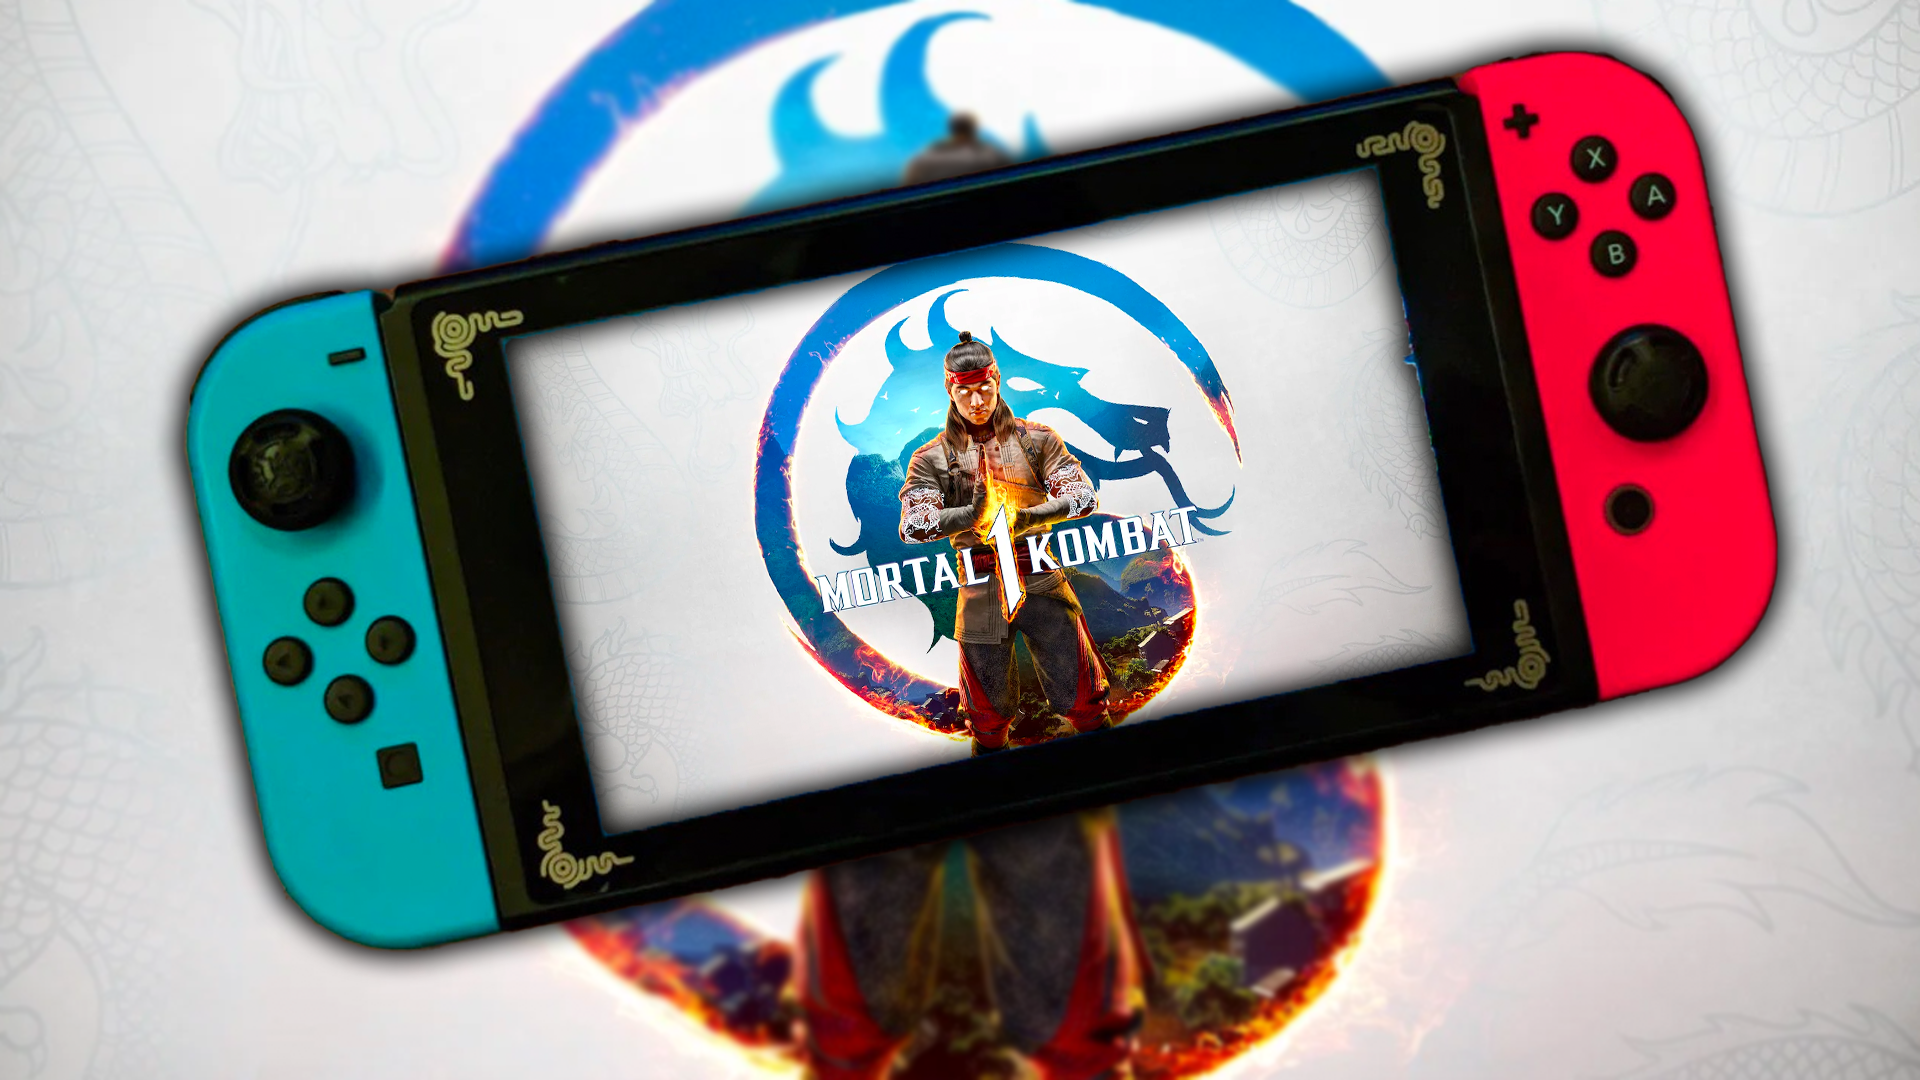 New game Mortal price a comes Switch with Kombat tag massive